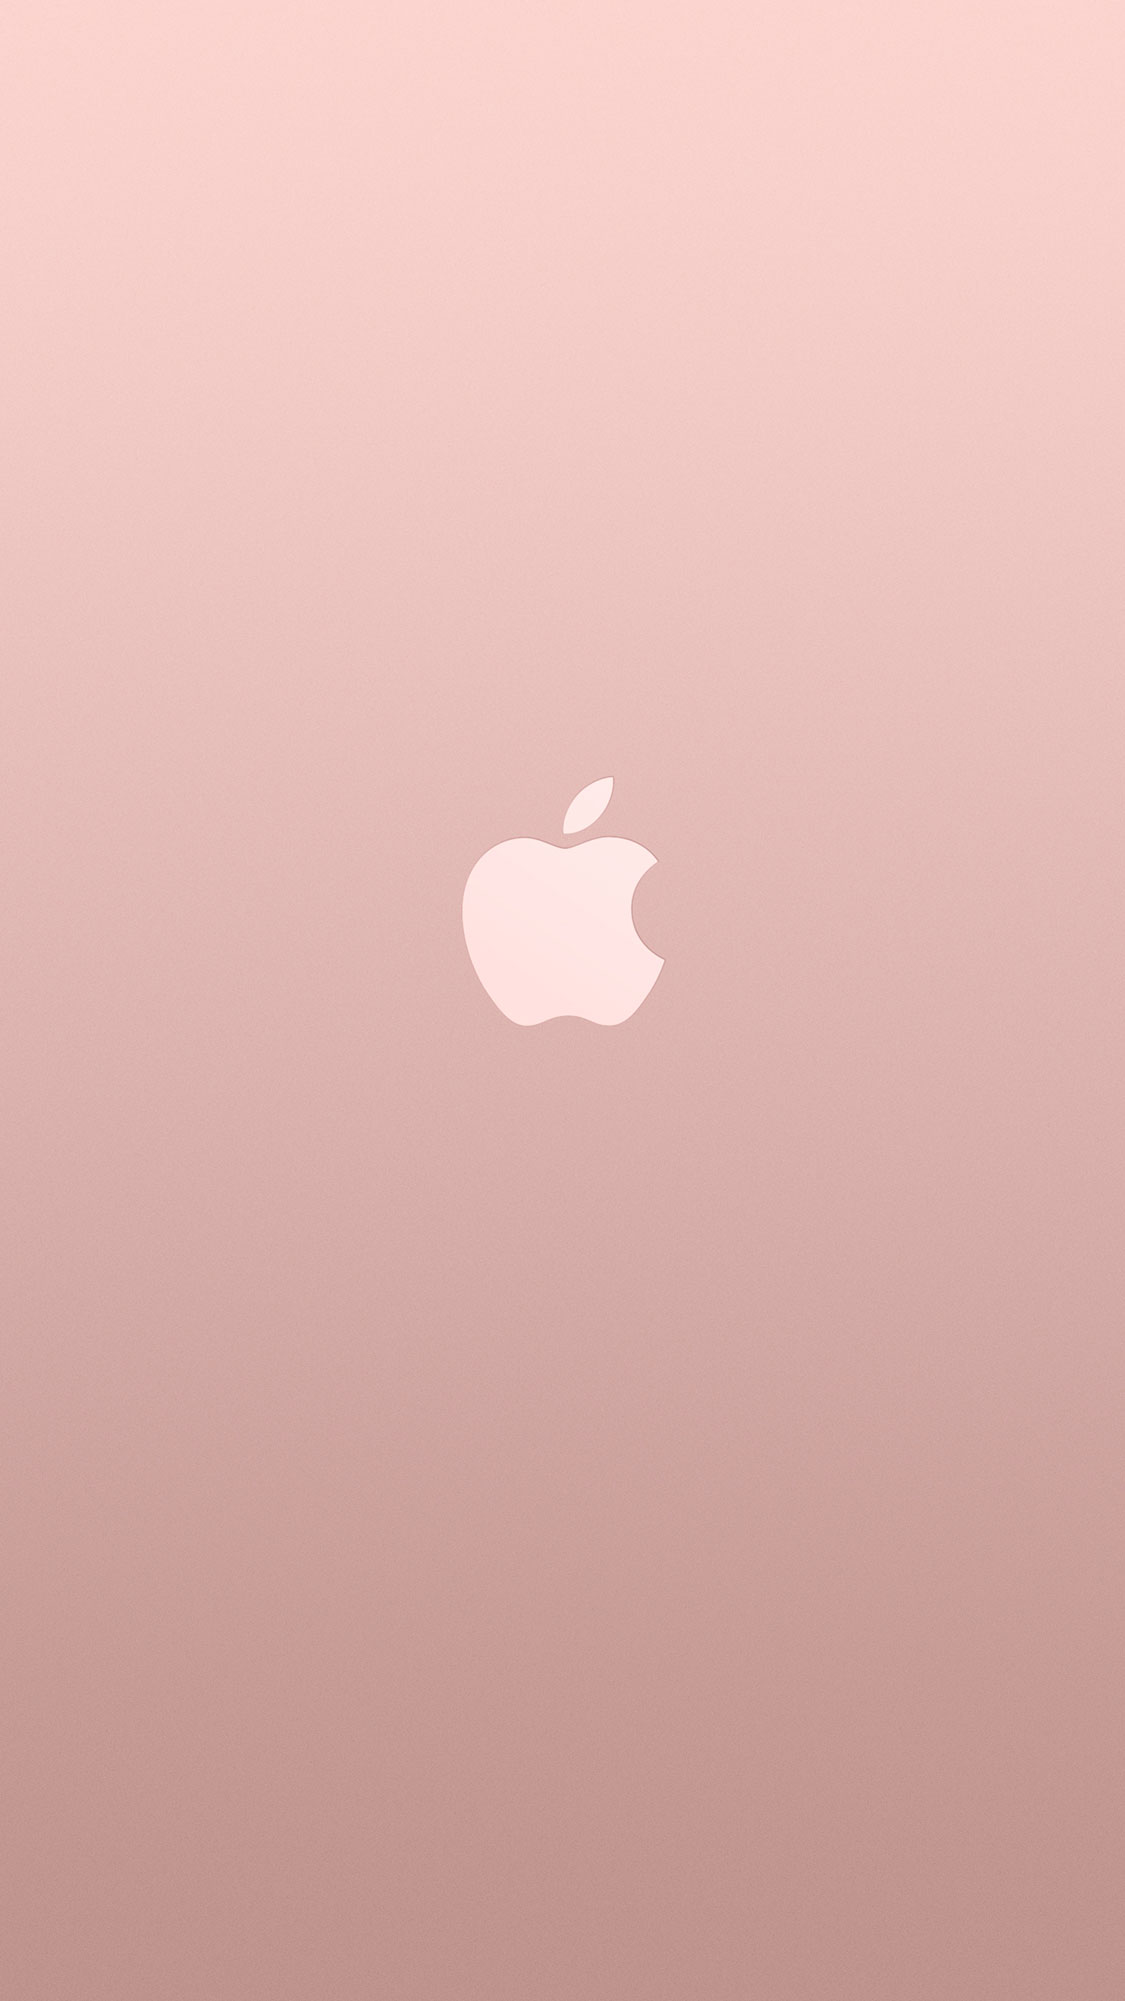 Free Download Gold Apple Iphone 6s Wallpaper Hdjpg Iphone Wallpapers 1125x01 For Your Desktop Mobile Tablet Explore 49 Apple Iphone 6s Wallpaper New Iphone 6s Wallpapers Iphone 6s